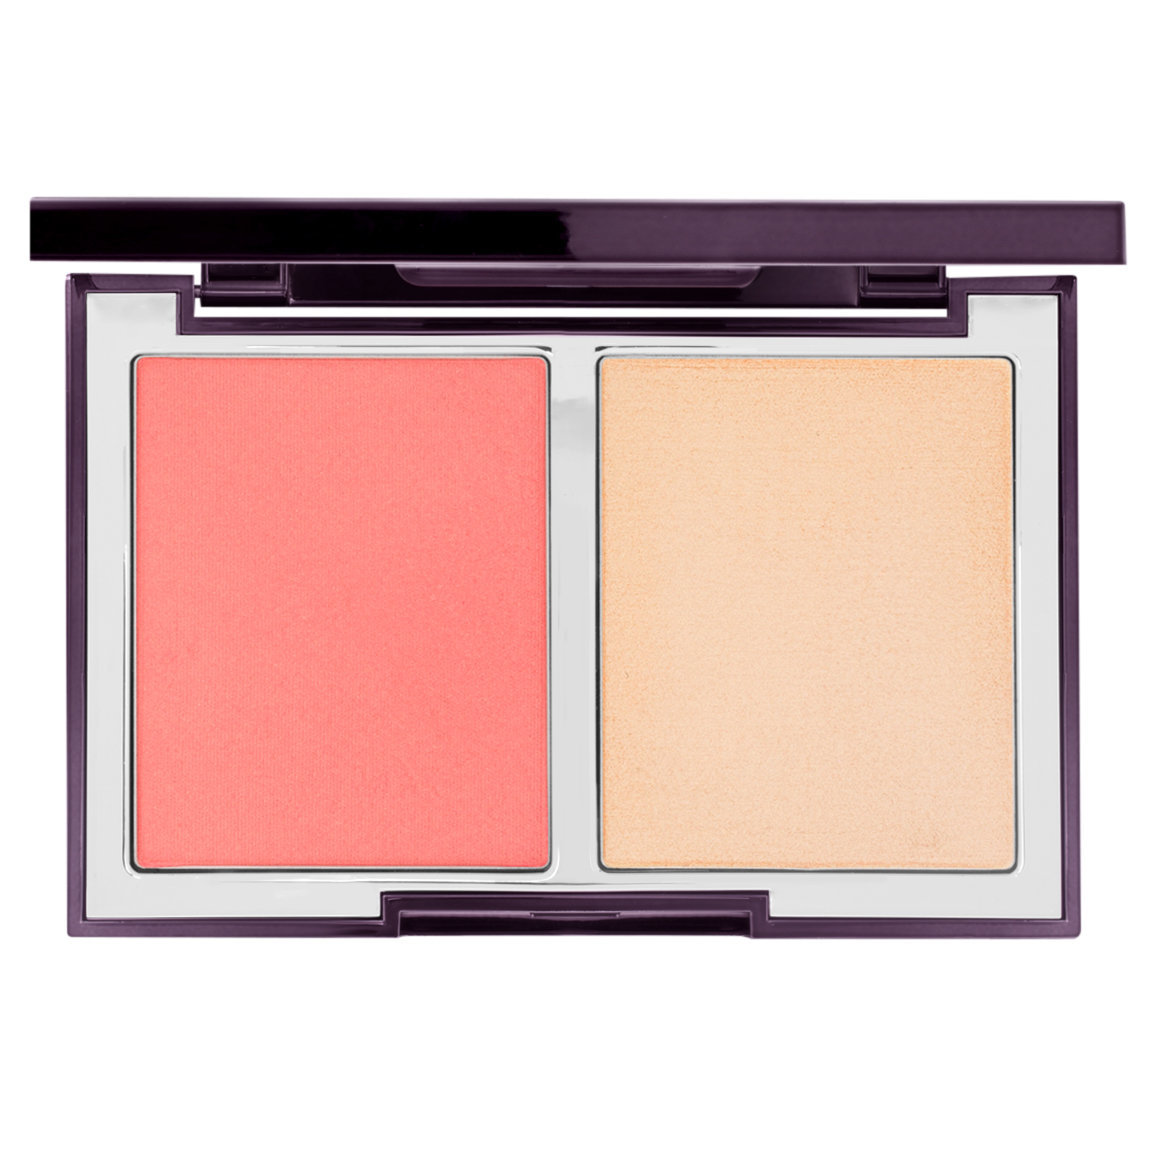 Wayne Goss The Weightless Veil Blush Palette Coral Rose alternative view 1 - product swatch.